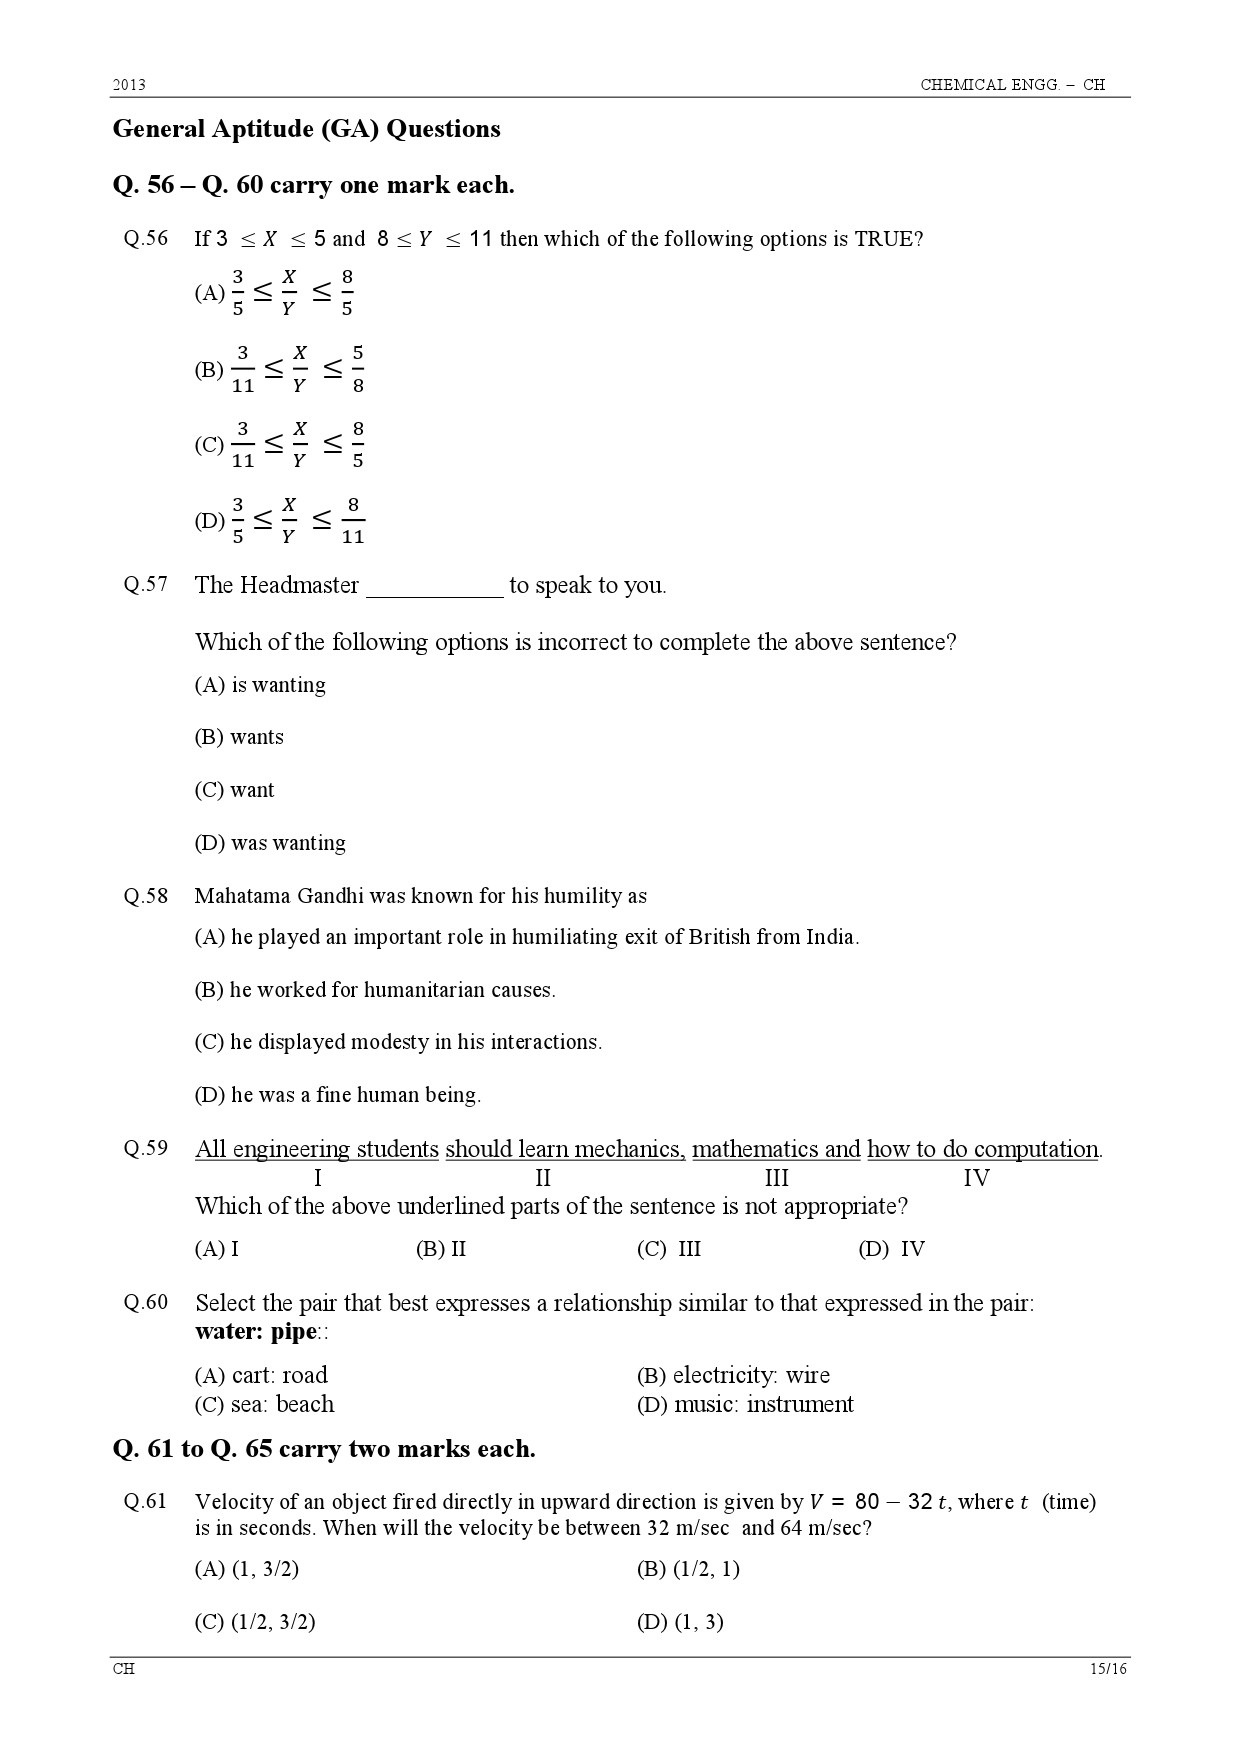 GATE Exam Question Paper 2013 Chemical Engineering 15